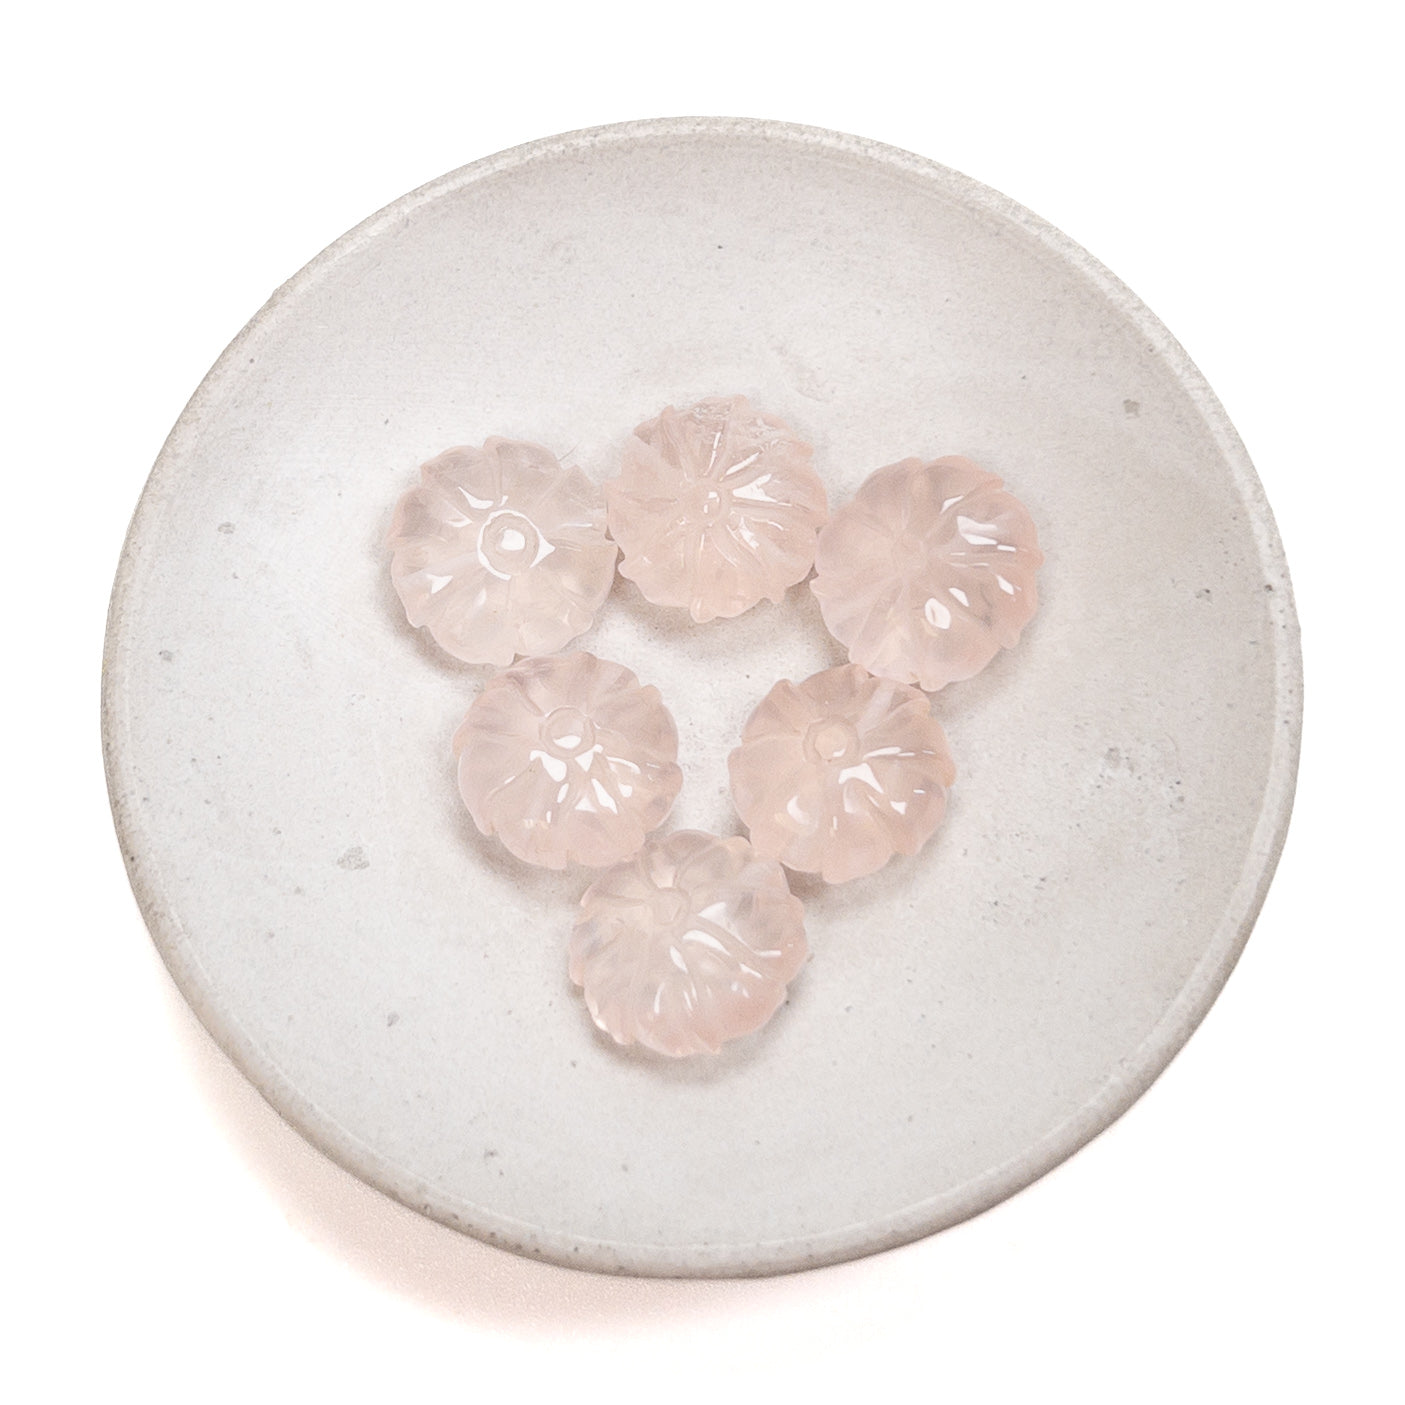 Mixed Quartz Carved Floral Coin Bead (6 Stones Available, Size Varies) - 1 pc.